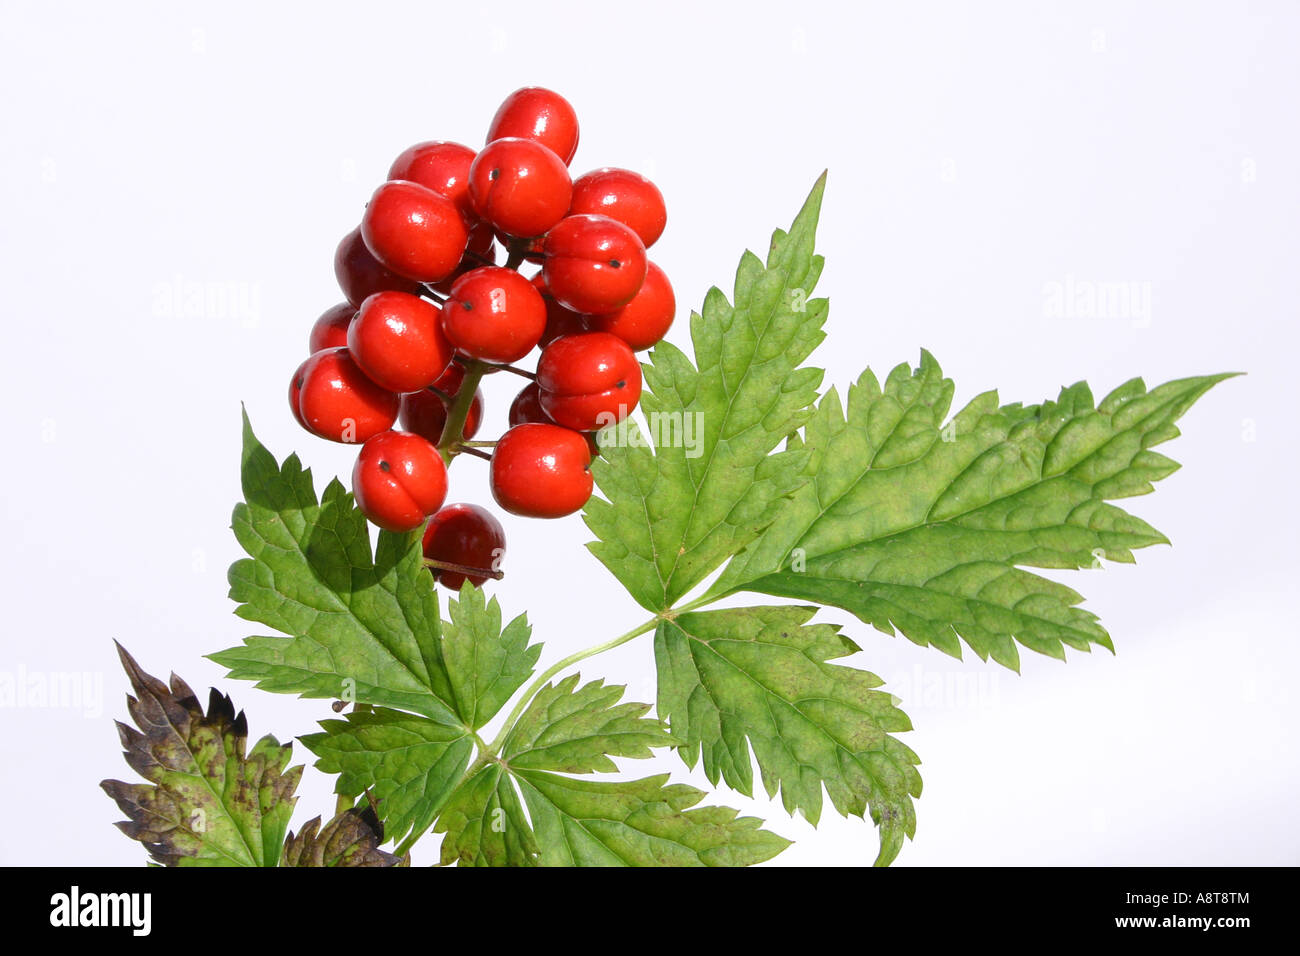 Baneberry red berry berries .5 ½ inch & green serrated leaves Stock Photo